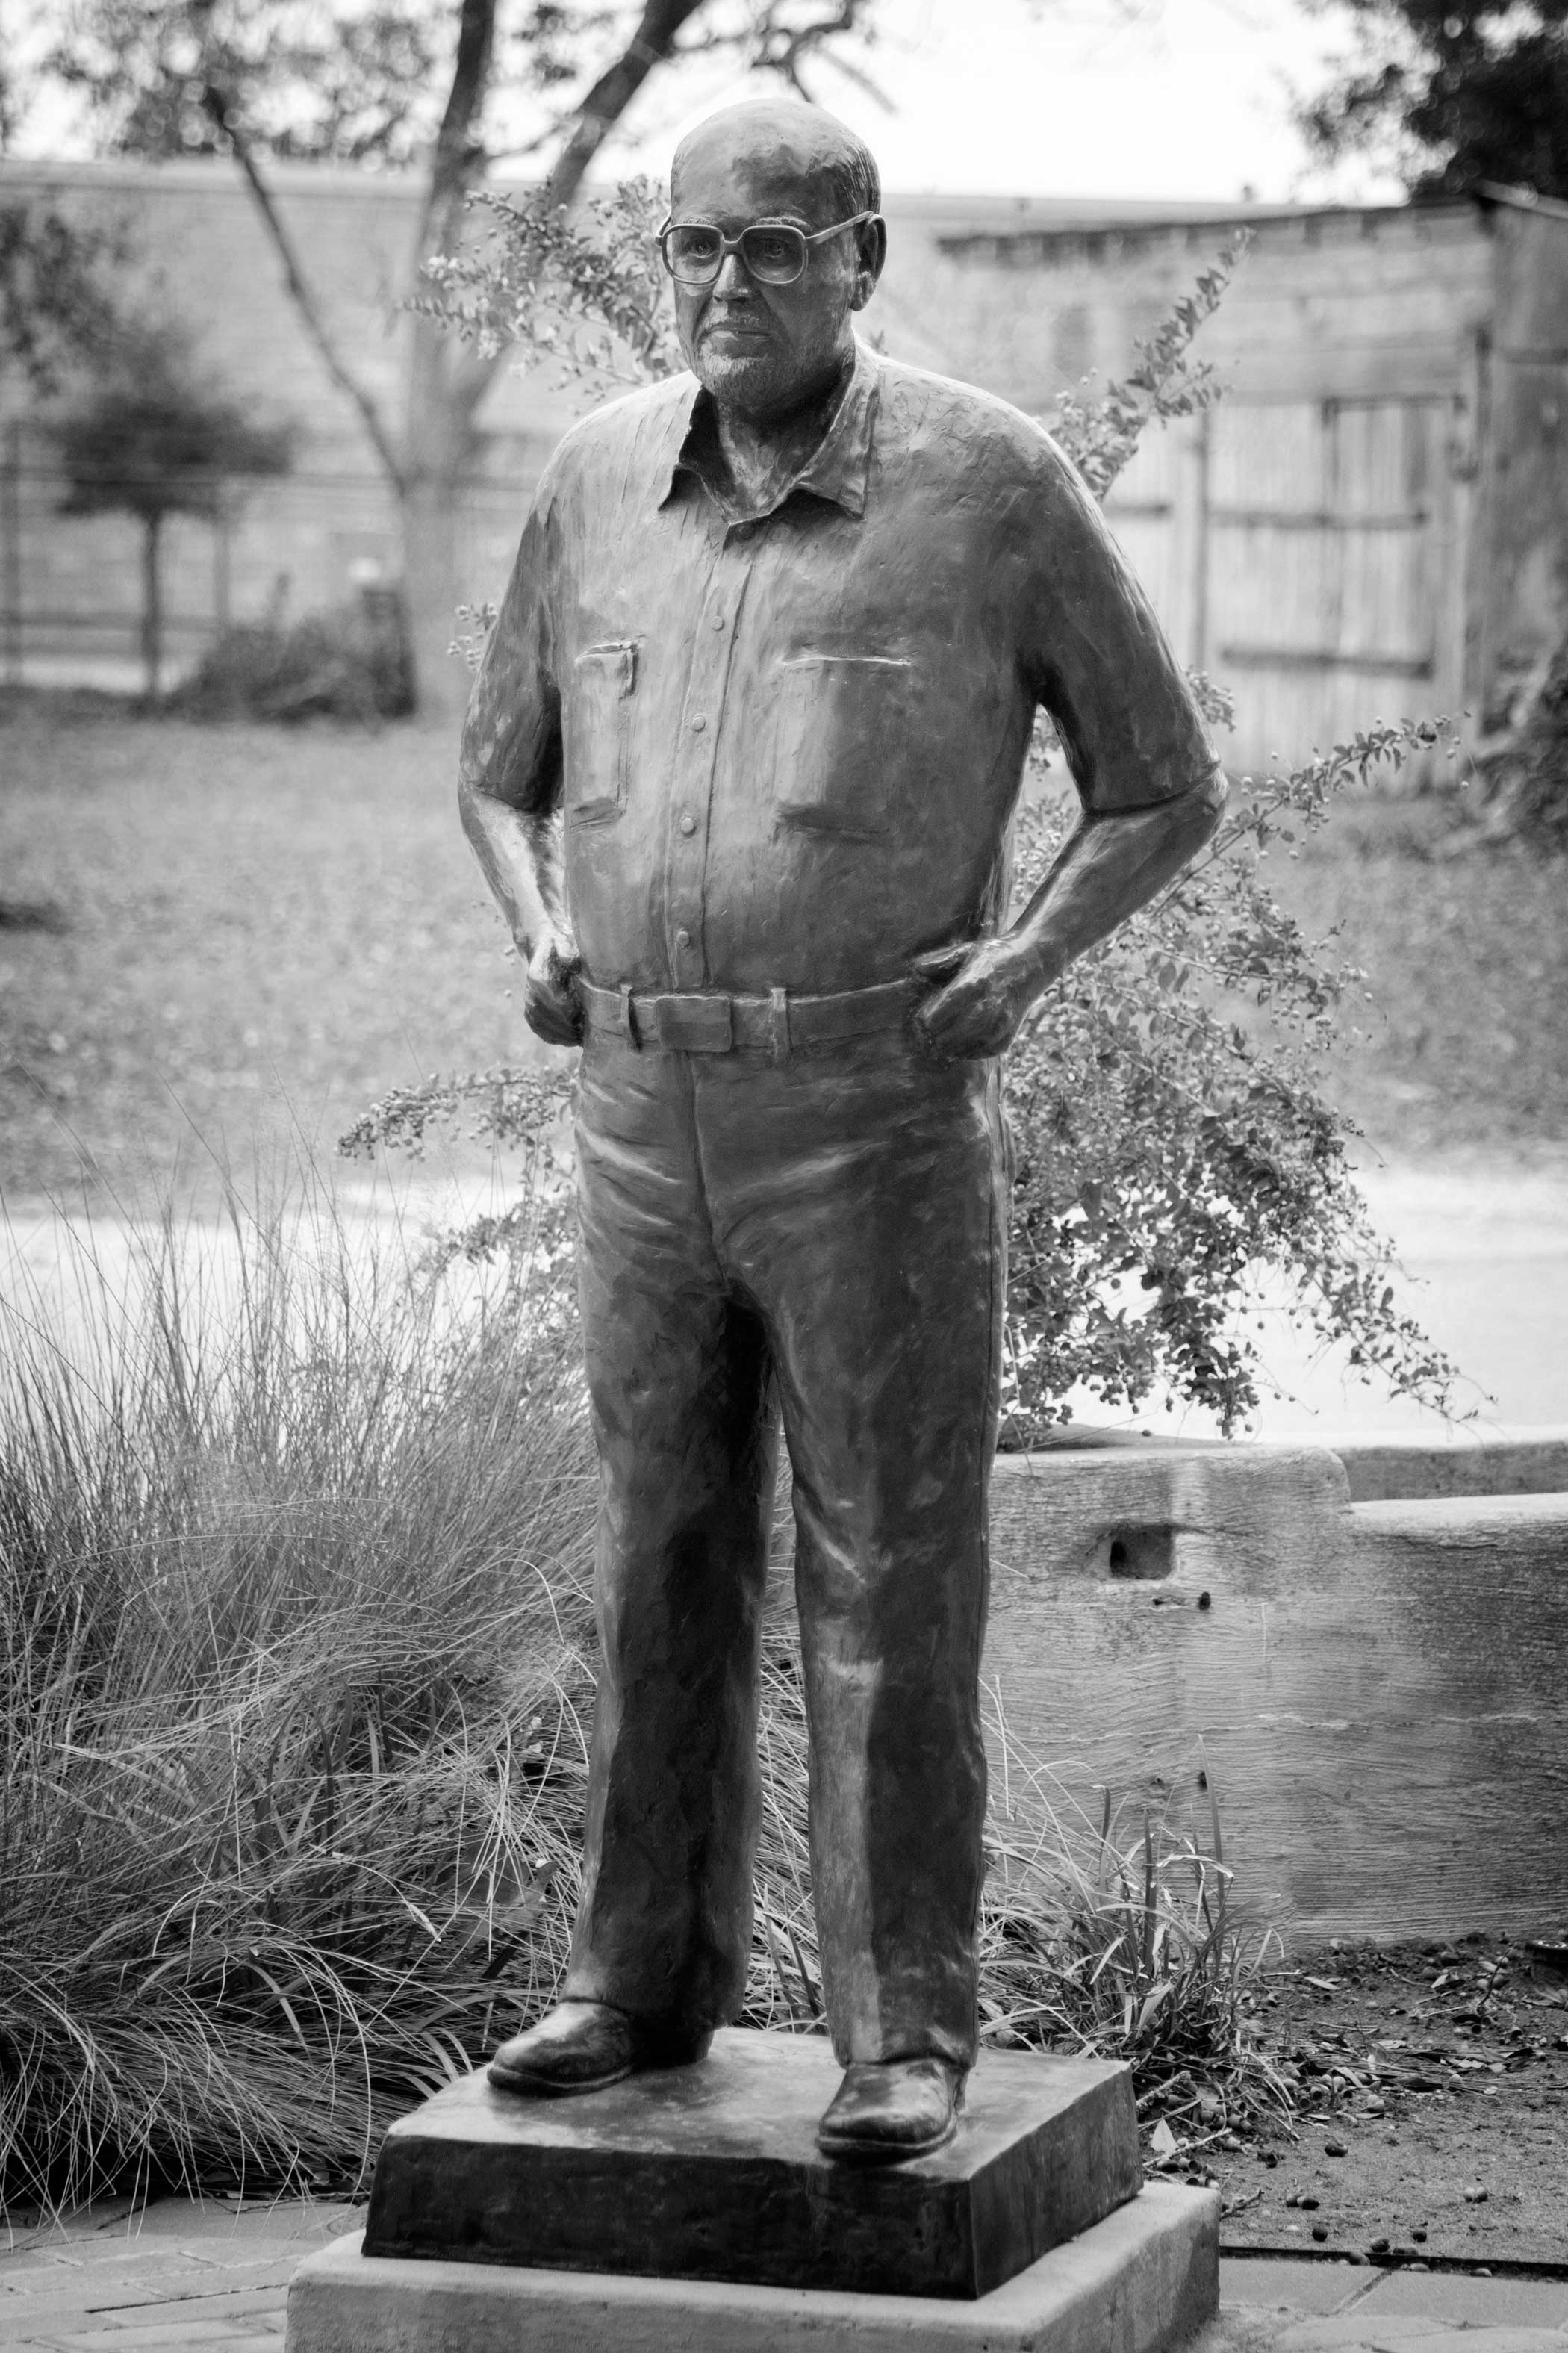 A bronze statue of Richmond Mayor Hilmar Moore is displayed outside City Hall in Richmond, Texas. Moore, who was appointed as mayor in 1949 and then won 32 consecutive elections, was the longest serving mayor in the U.S. when he died.